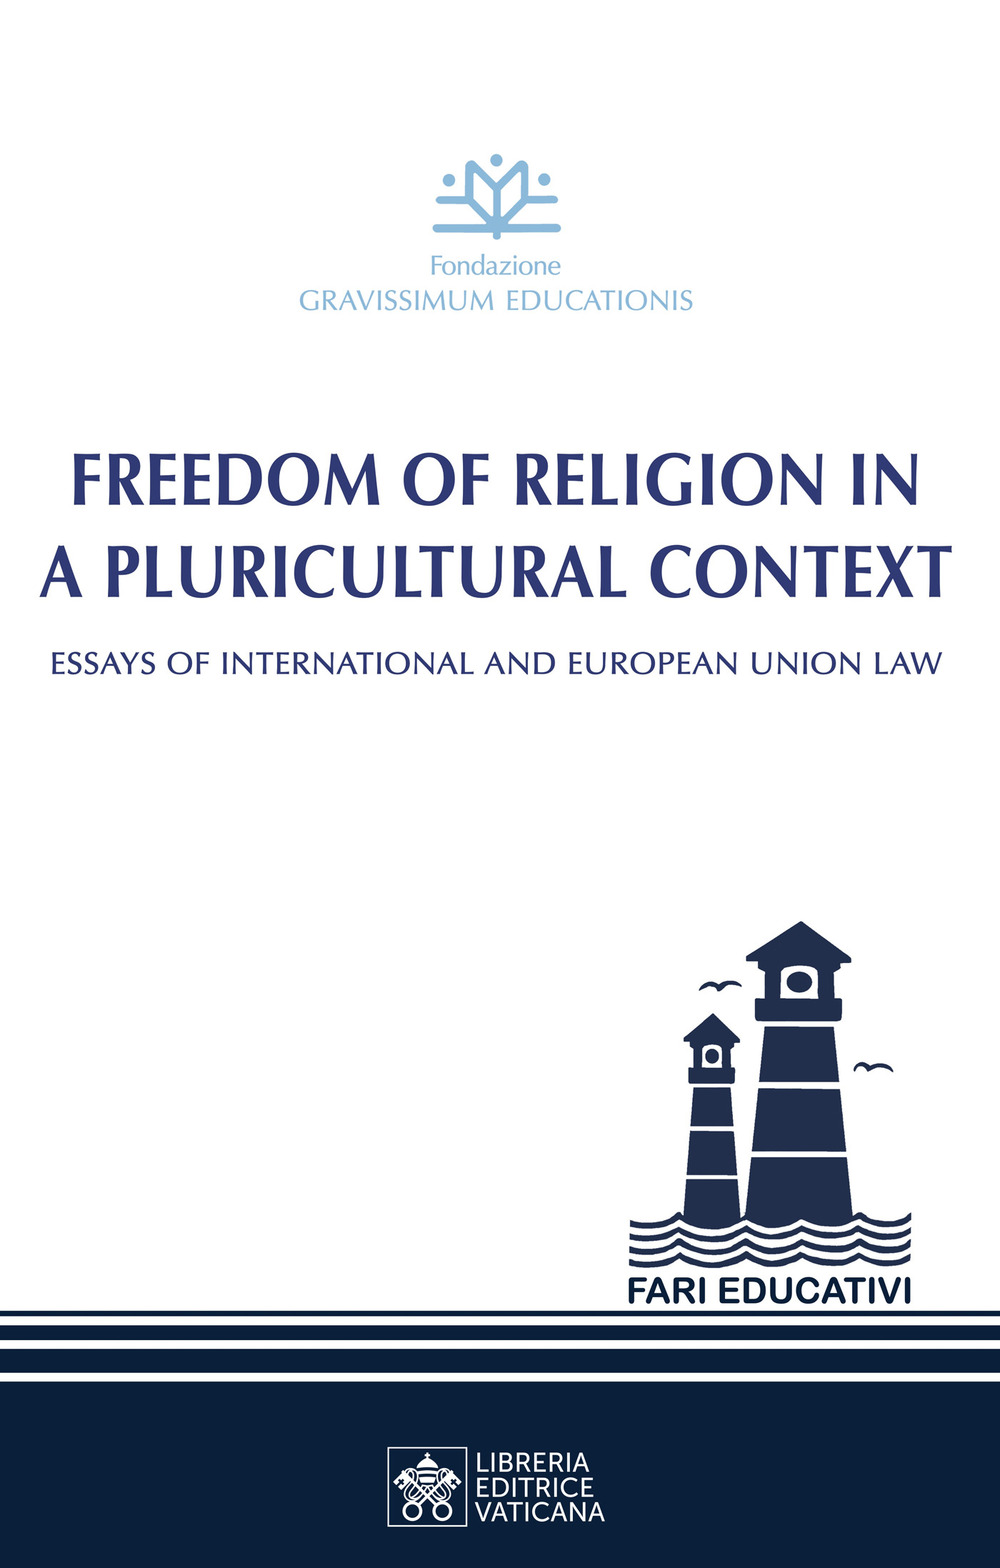 Freedom of religion in a pluricultural context. Essay of International and European Union Law